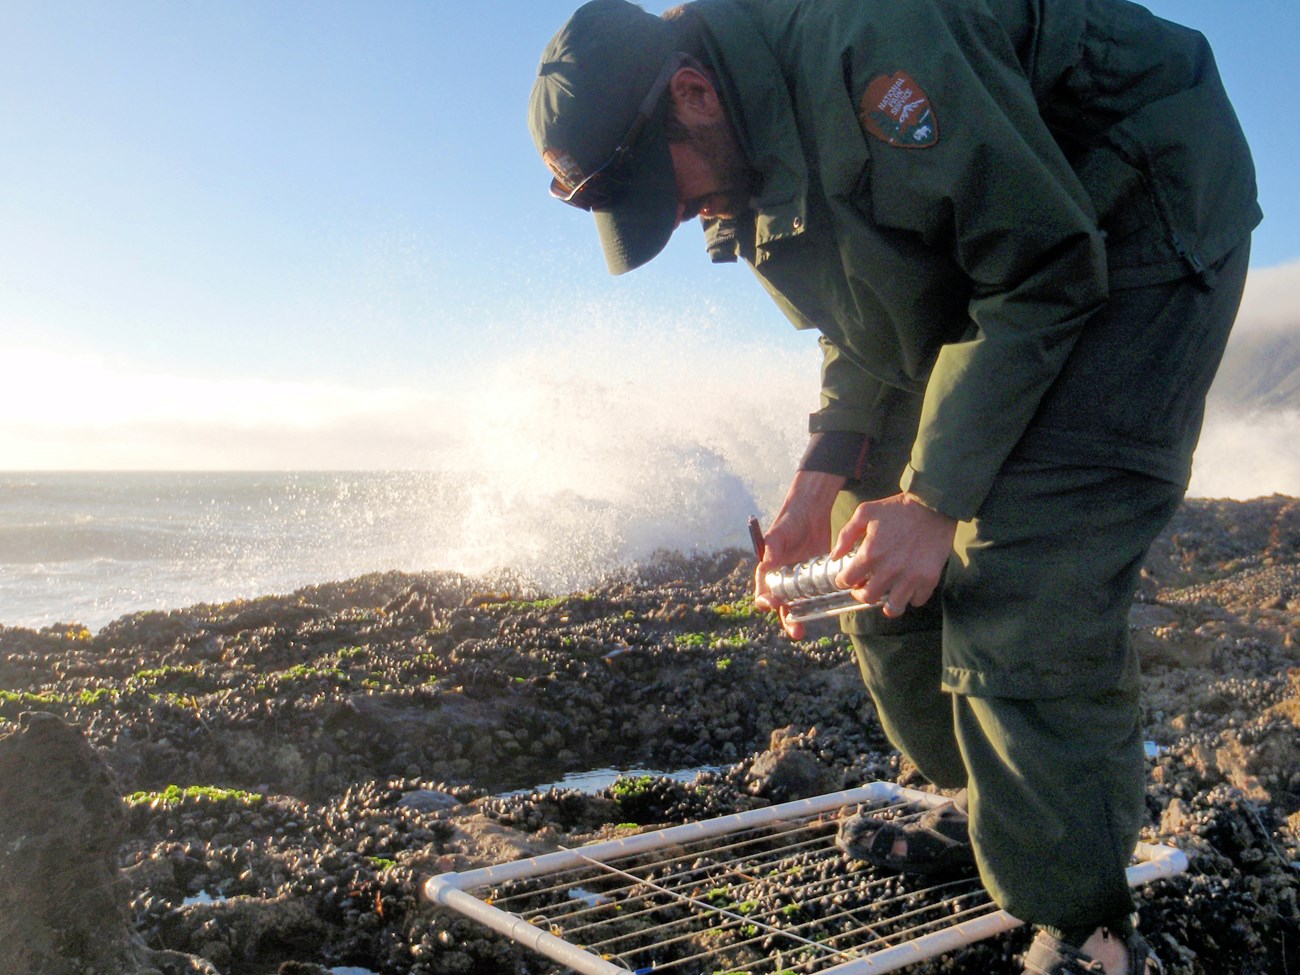 Steve using a counting device to tally mussels in a rocky intertidal plot as waves crash in the background.